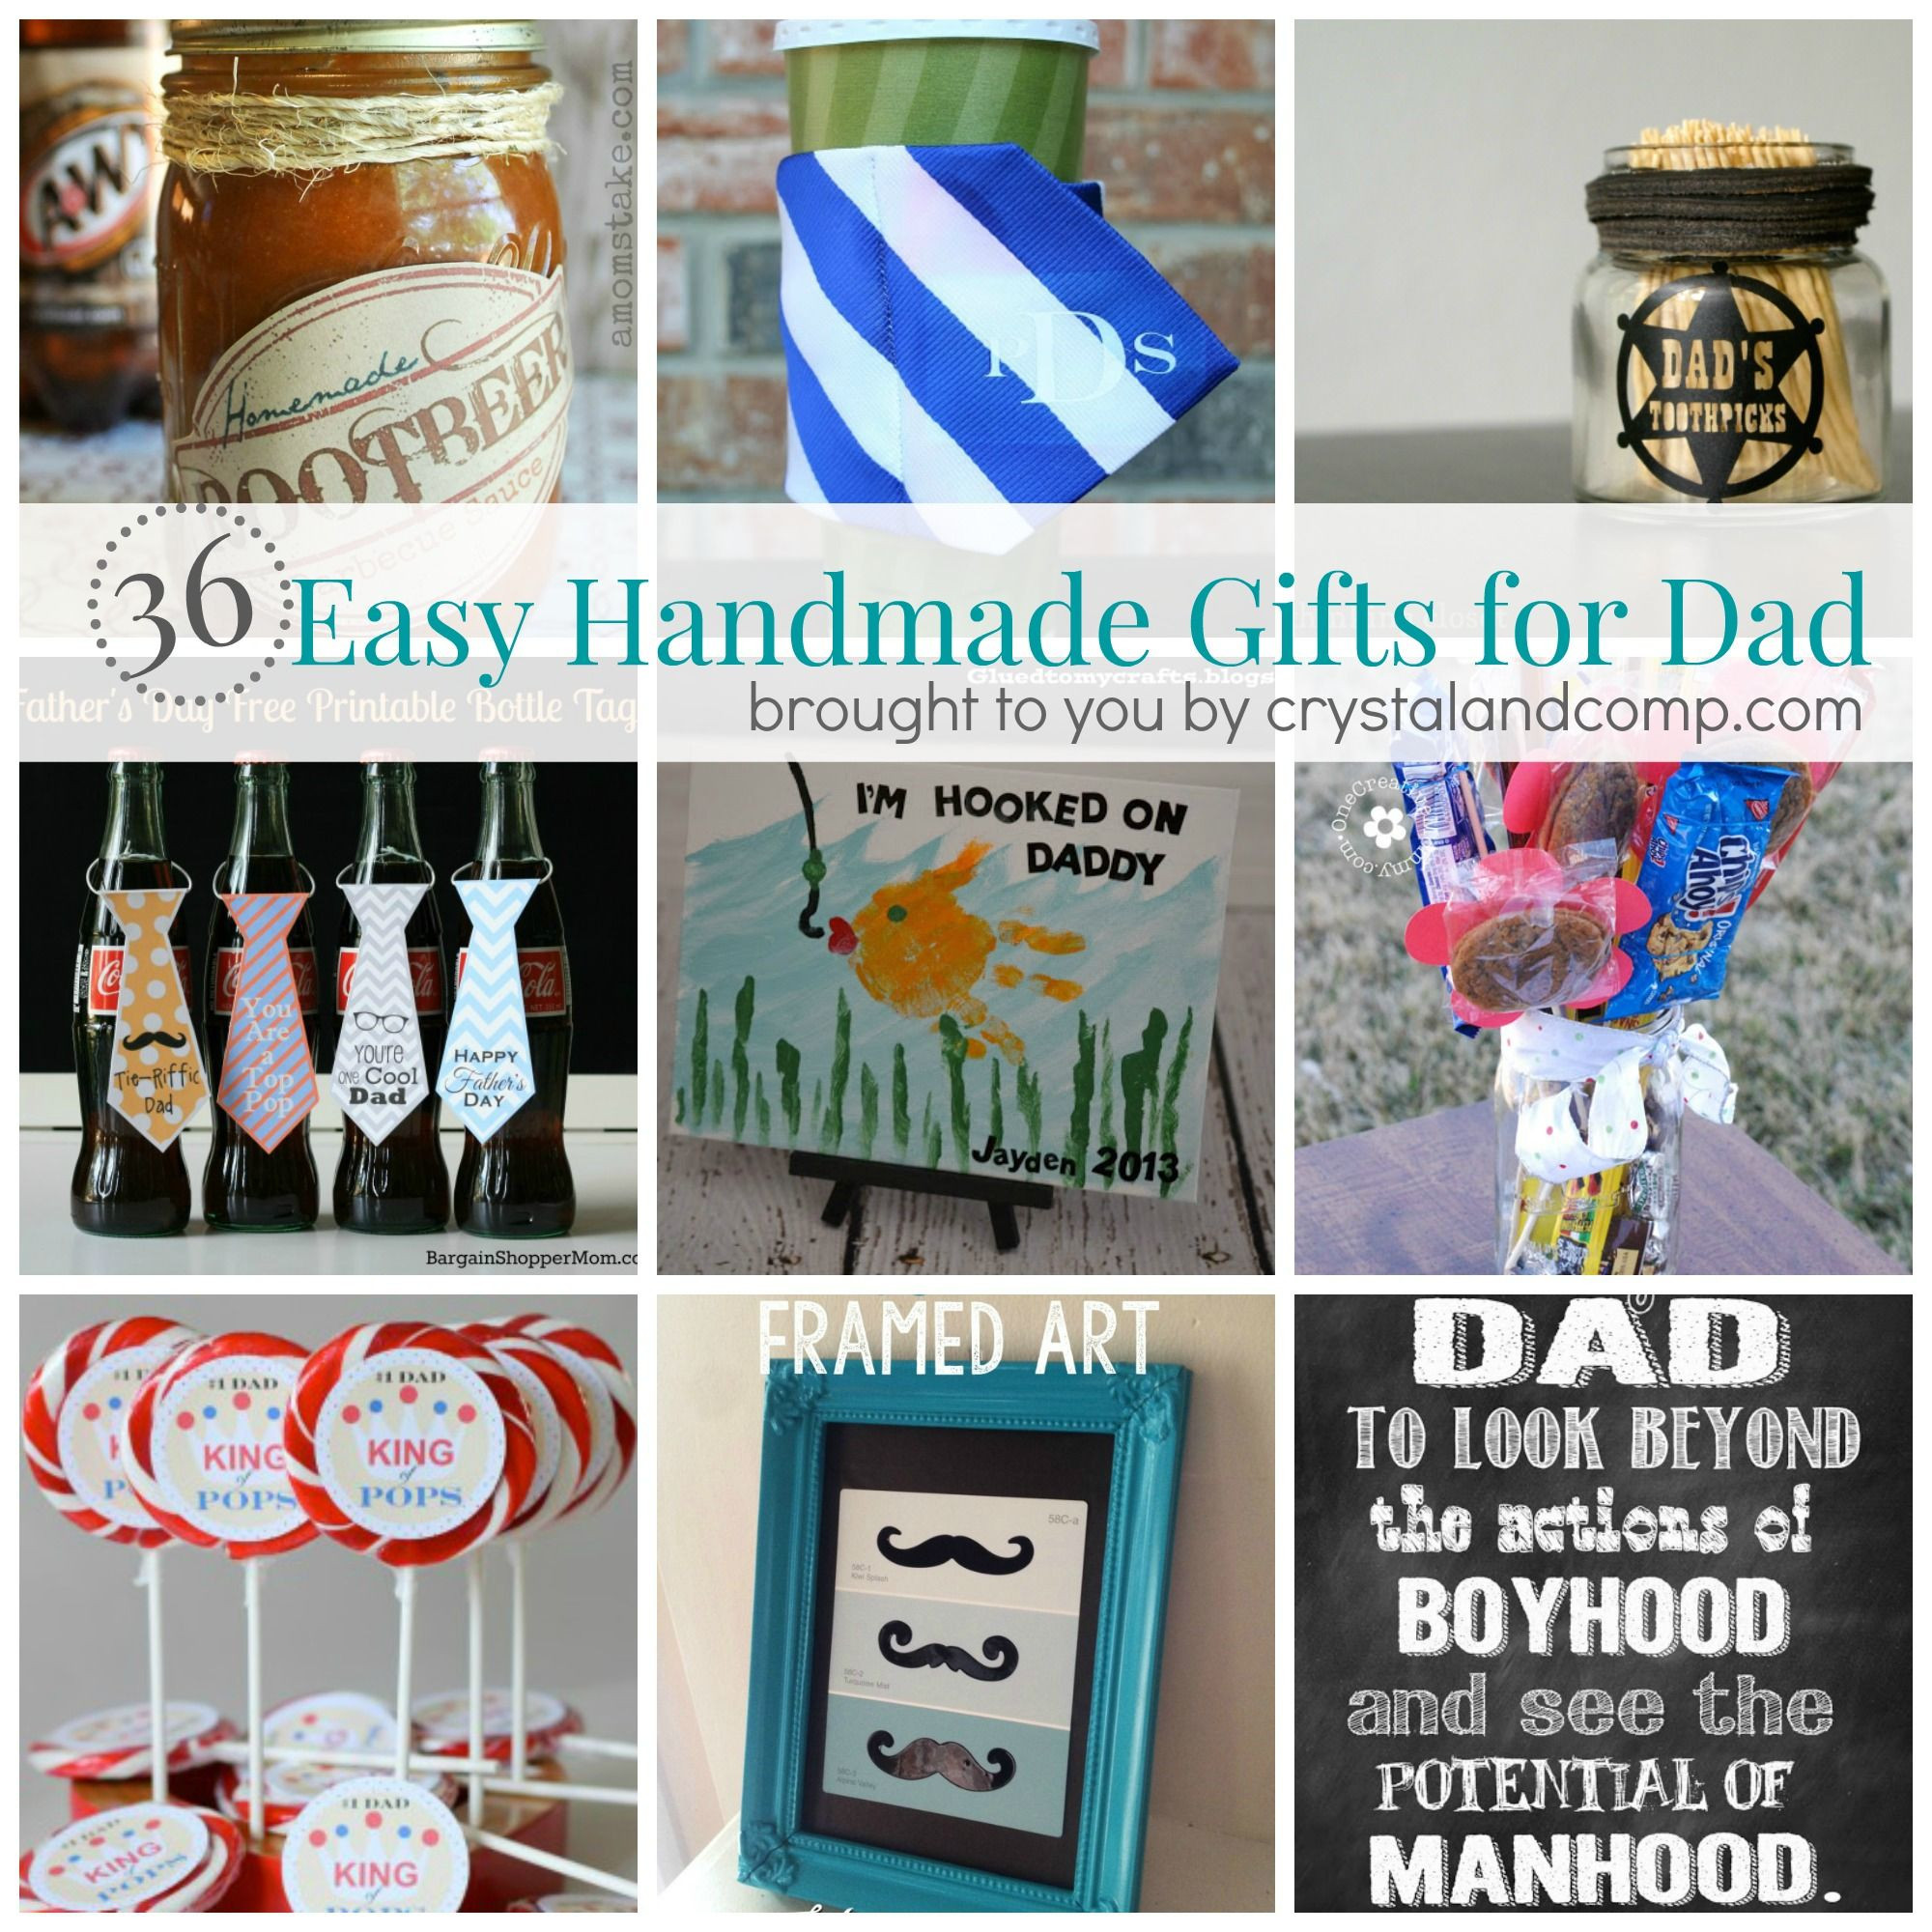 Holiday Gift Ideas For Dad
 36 Easy Handmade Gift Ideas for Dad